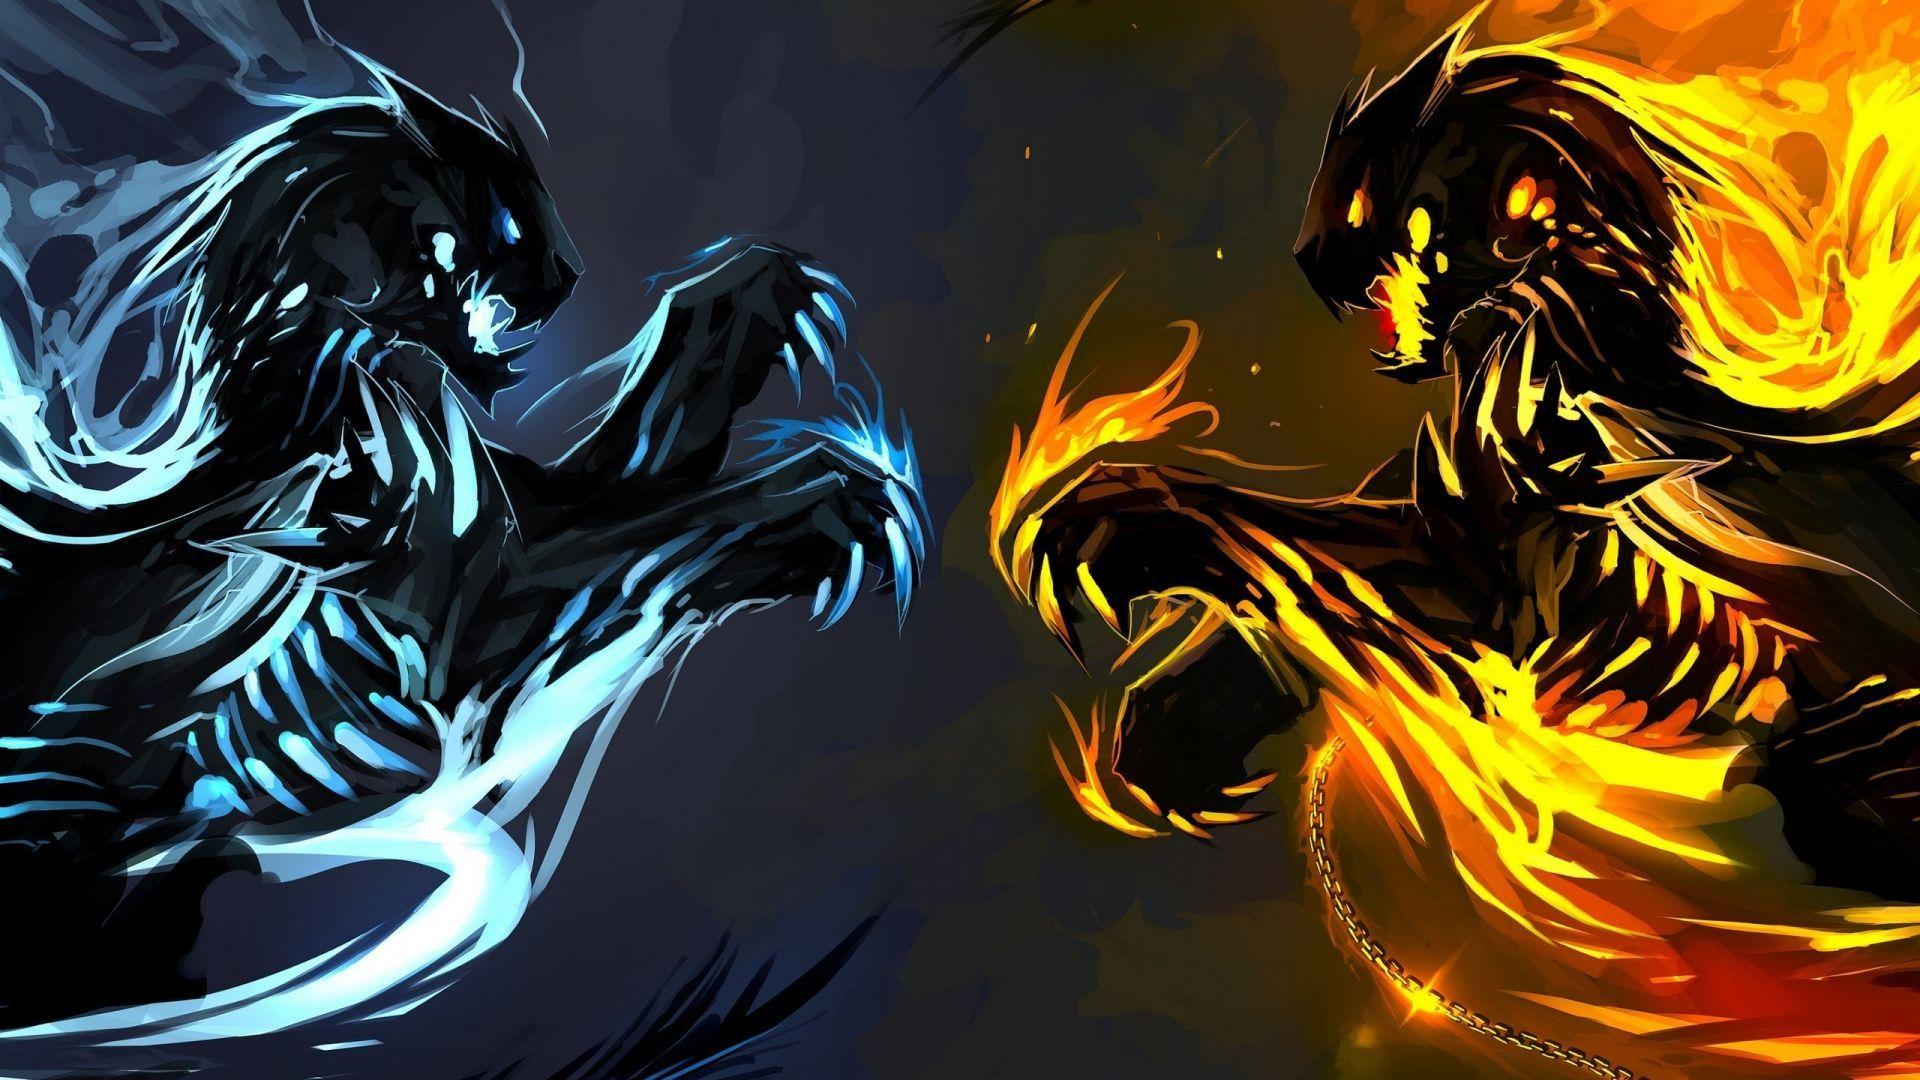 Ice and Fire Dragons wallpaper 2560x1440. Fire and ice dragons, Ice dragon, Fire dragon